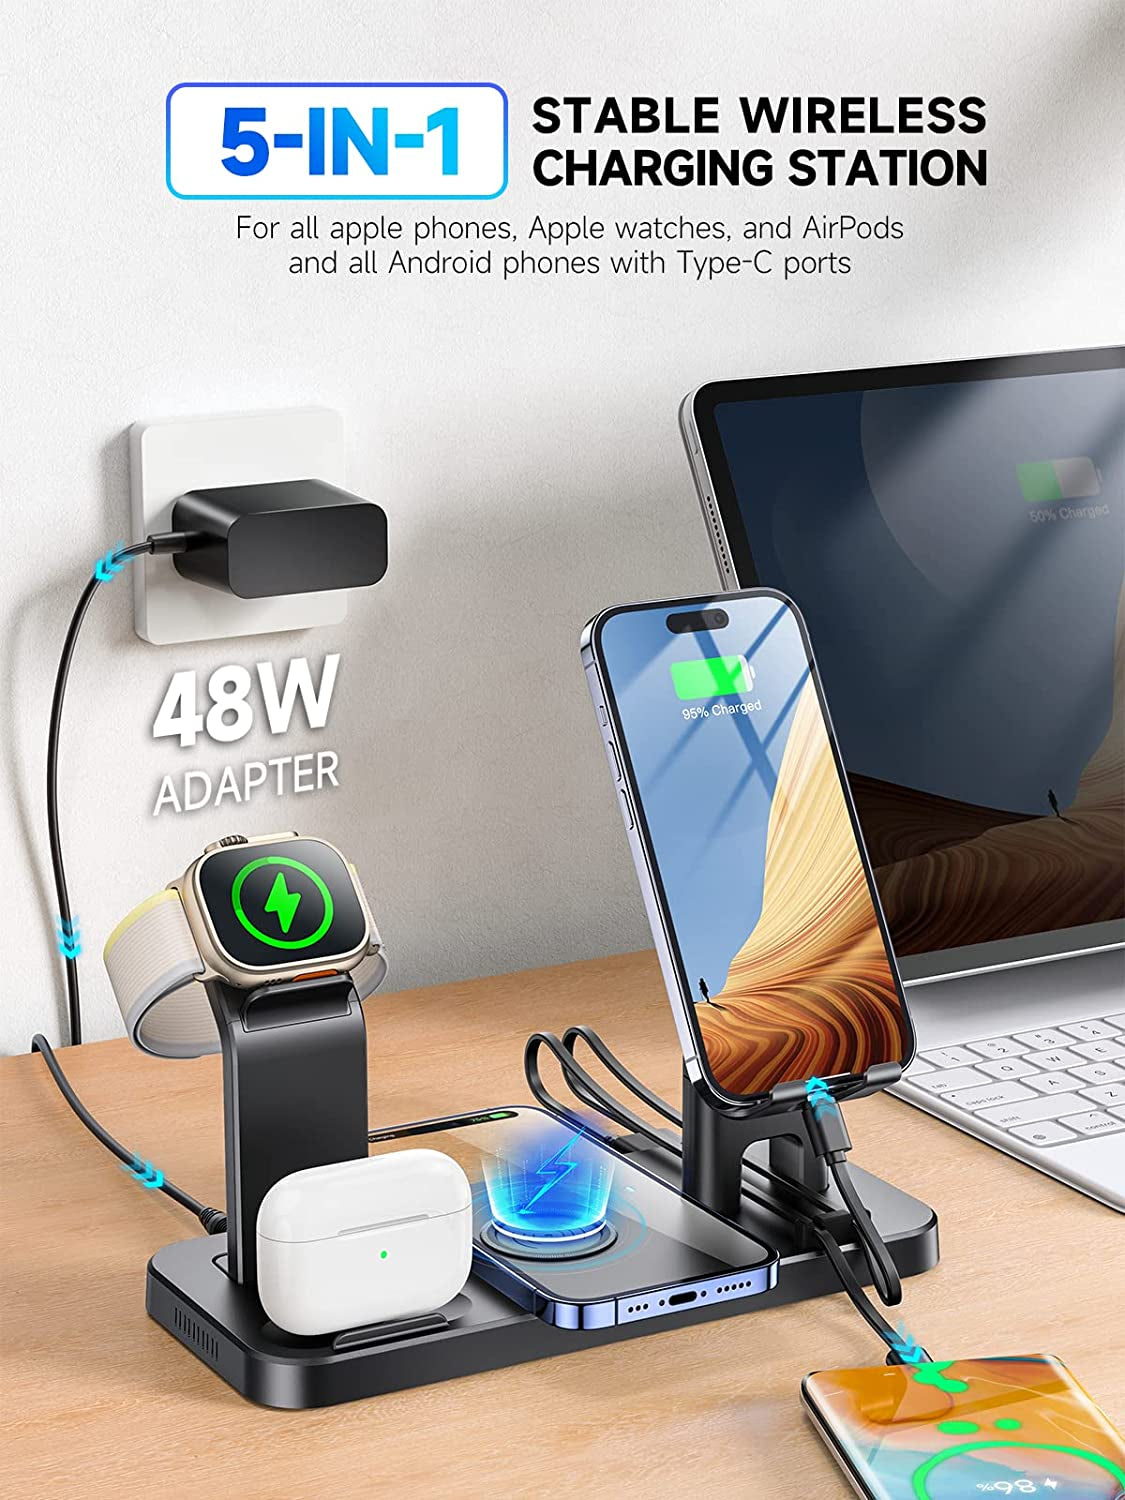  48W 5-in-1 Fast Wireless Charger Compatible with iPhone, AirPods, and Apple Watch - (Black)